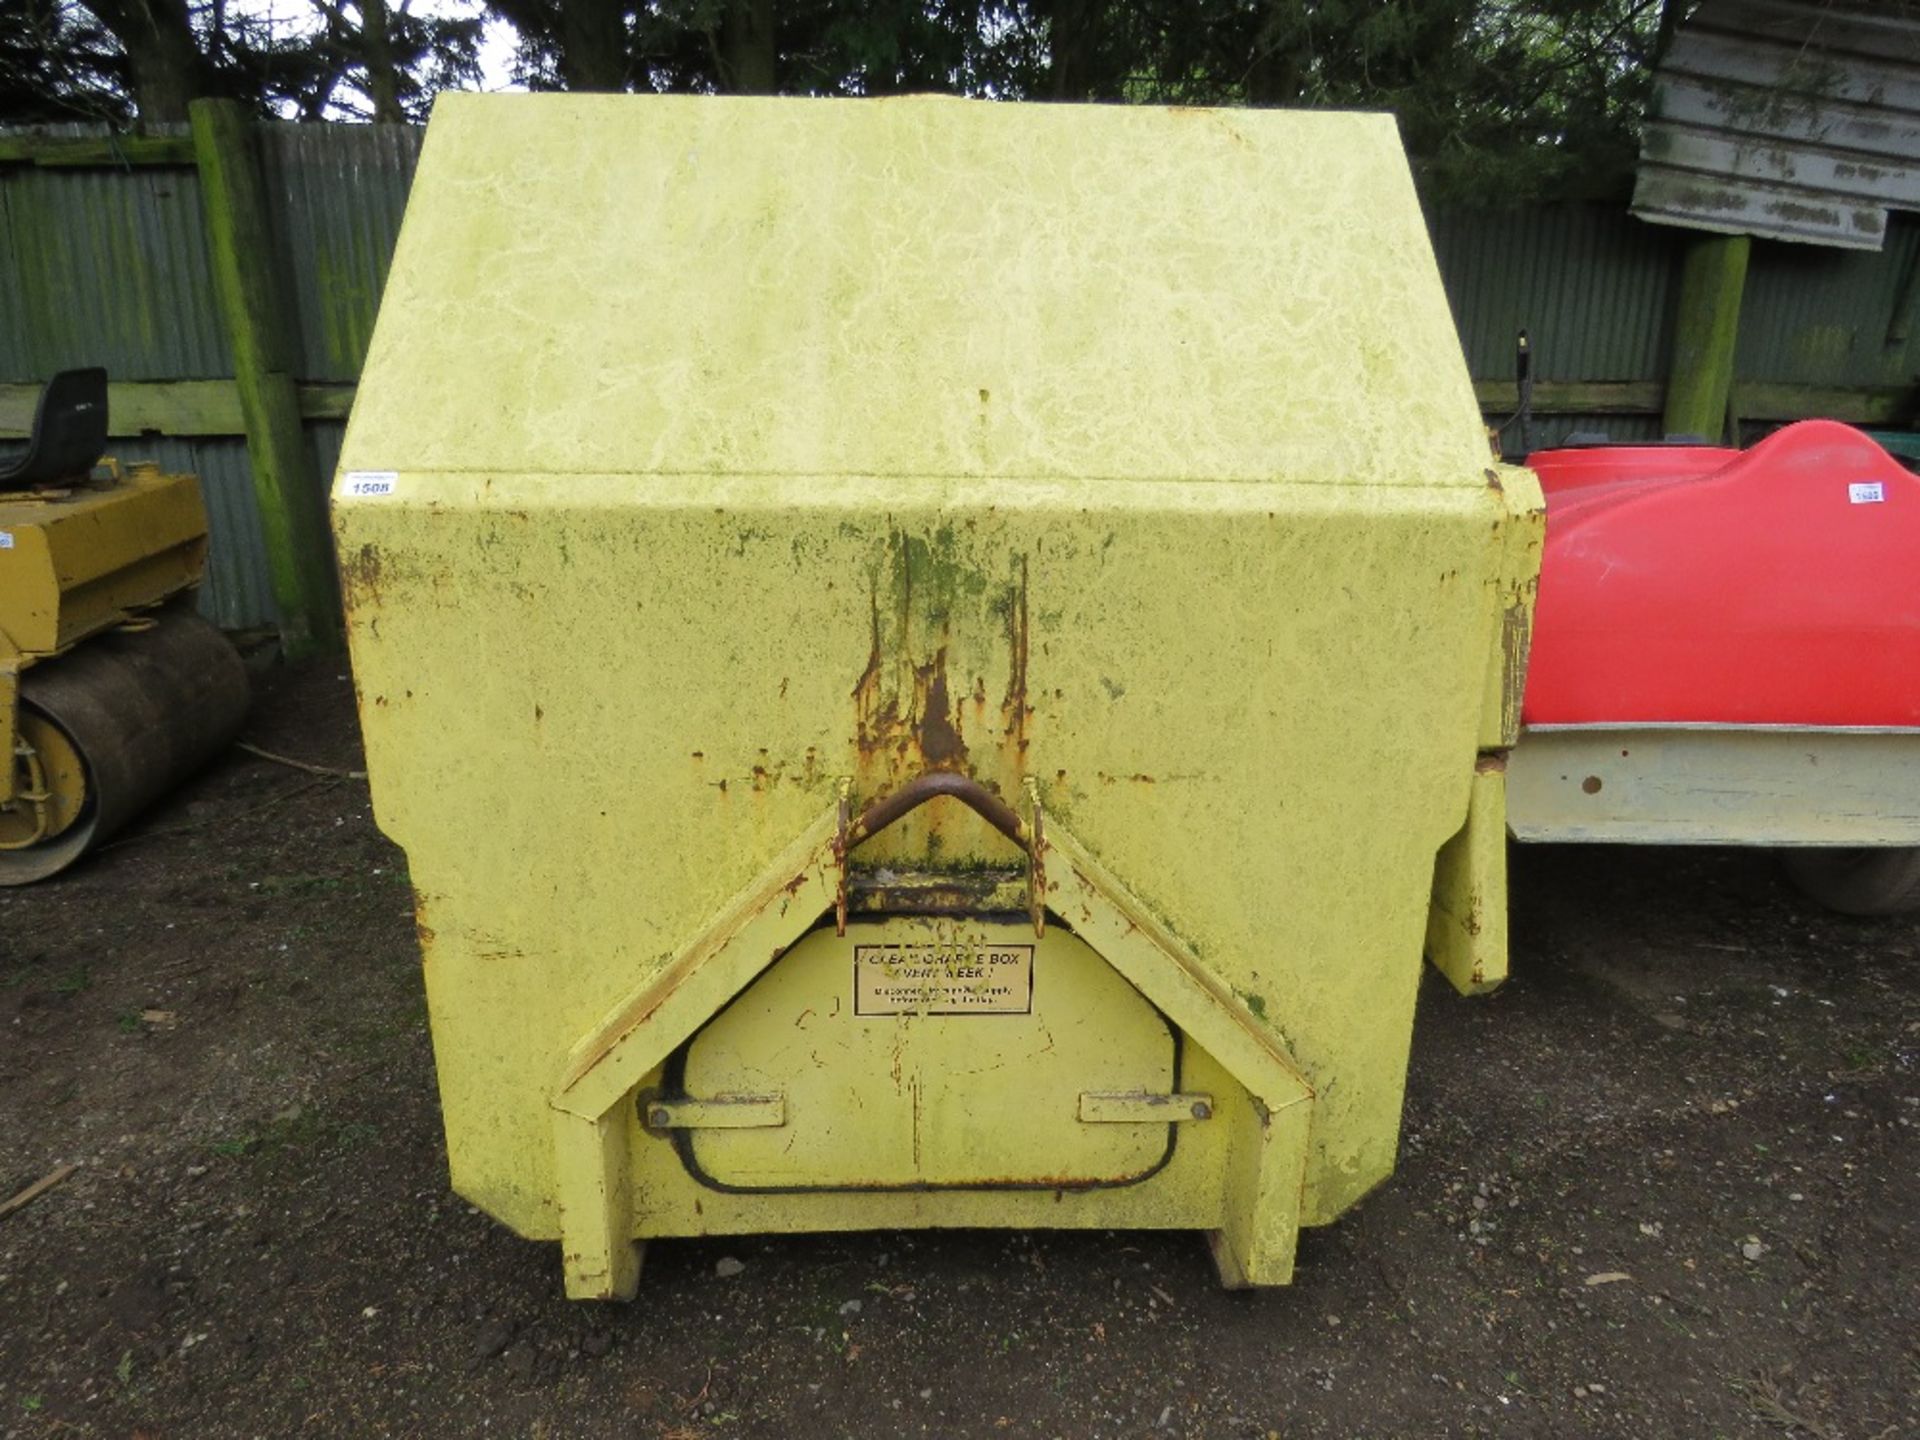 CHISWICK PARK ENJOY-WORK HL5 MOUNTED ELECTRIC POWERED COMPACTOR BIN. 12FT OVERALL LENGTH APPROX. DIR - Image 2 of 7